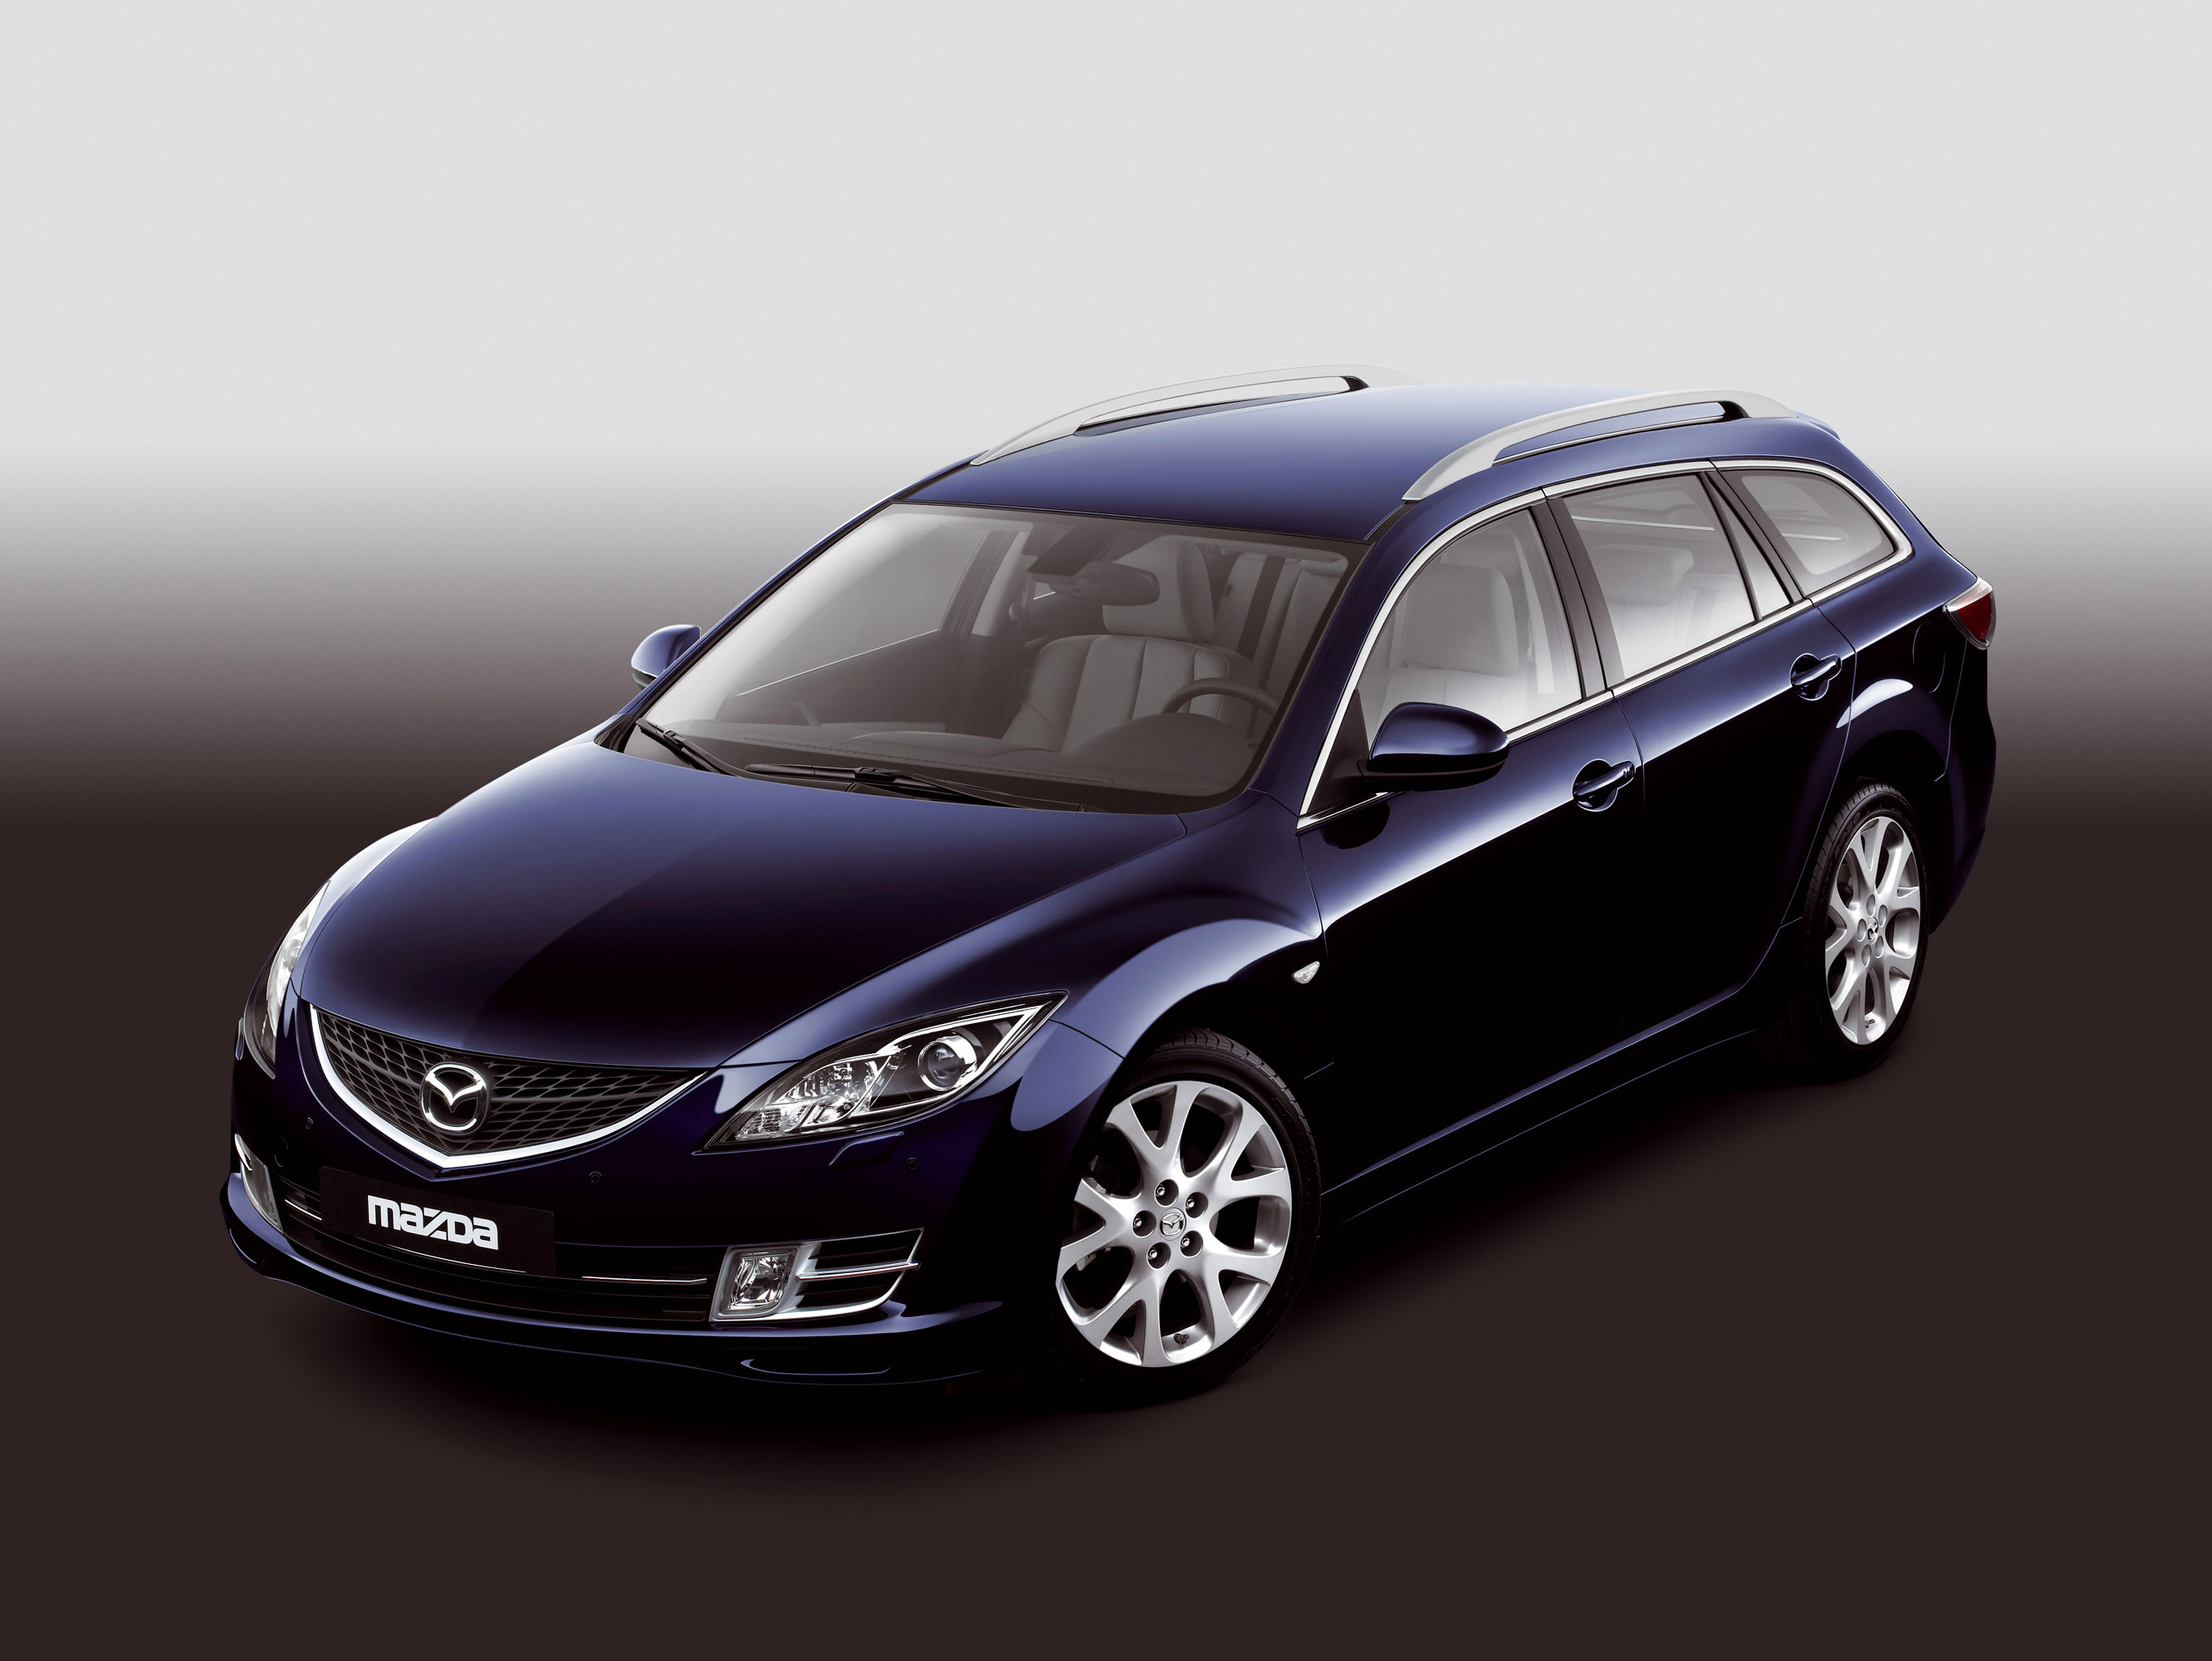 2008 Mazda 6 Wagon HD Pictures